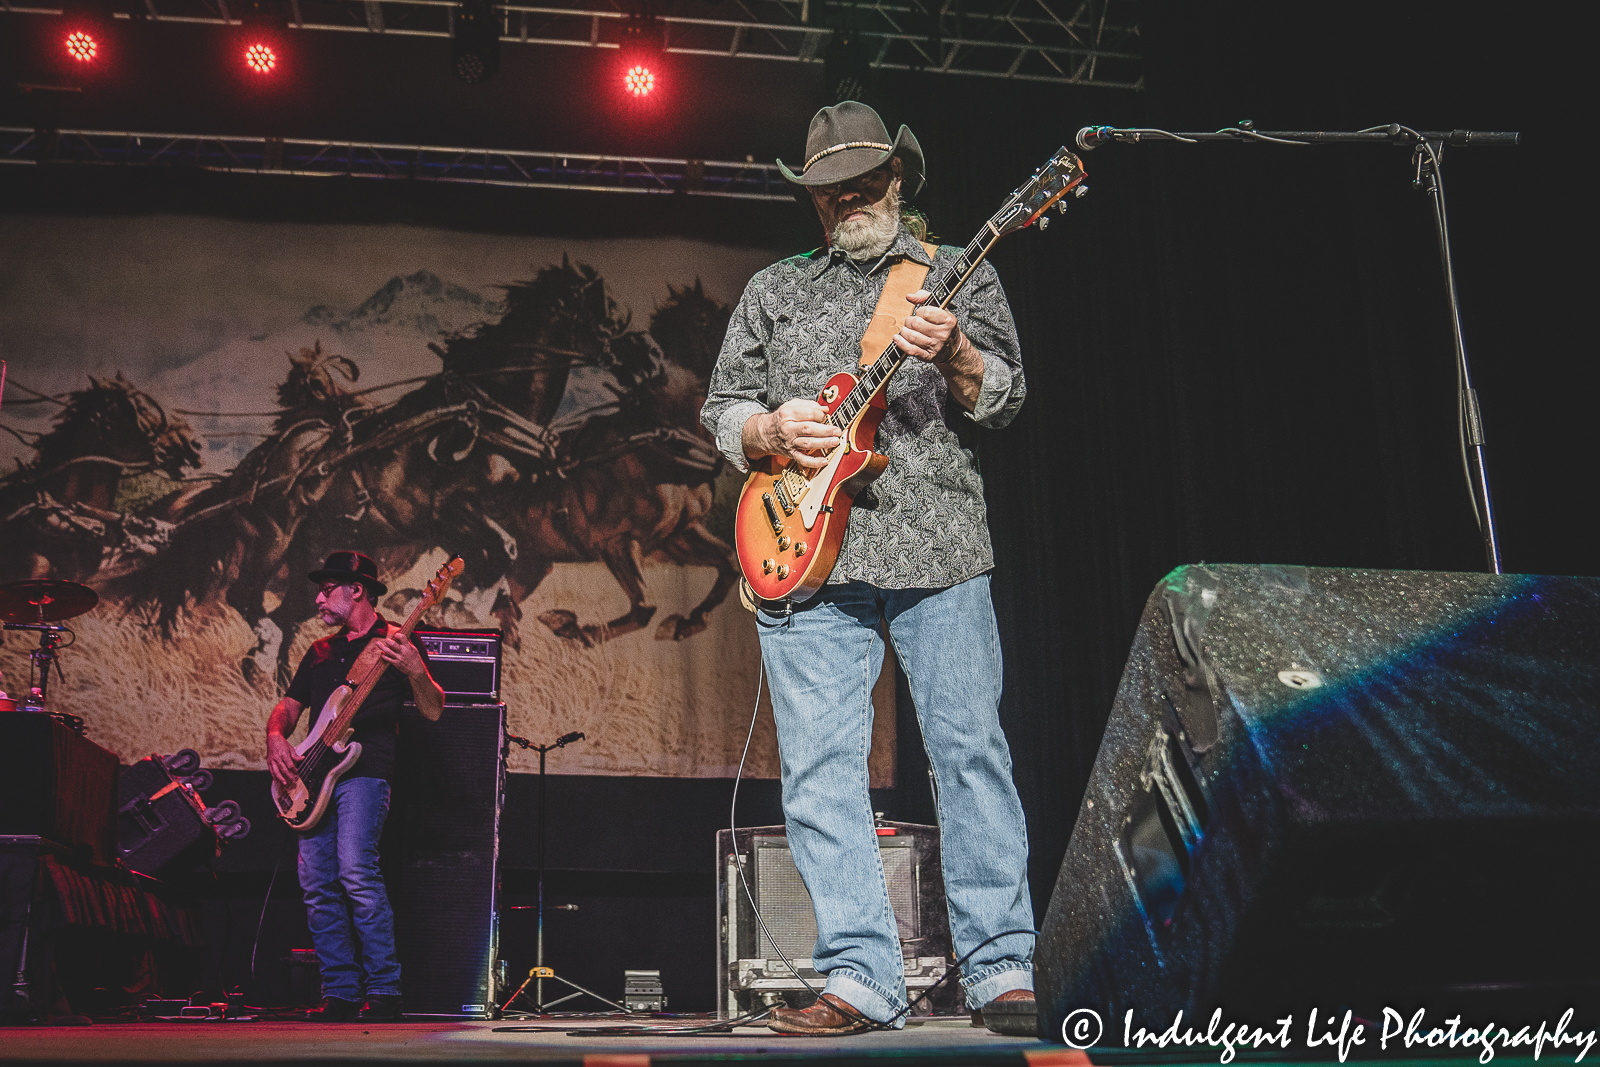 Guitarist Rick Willis and bass player Tony Black of The Marshall Tucker Band performing together at Ameristar Casino in Kansas City, MO on October 28, 2022.